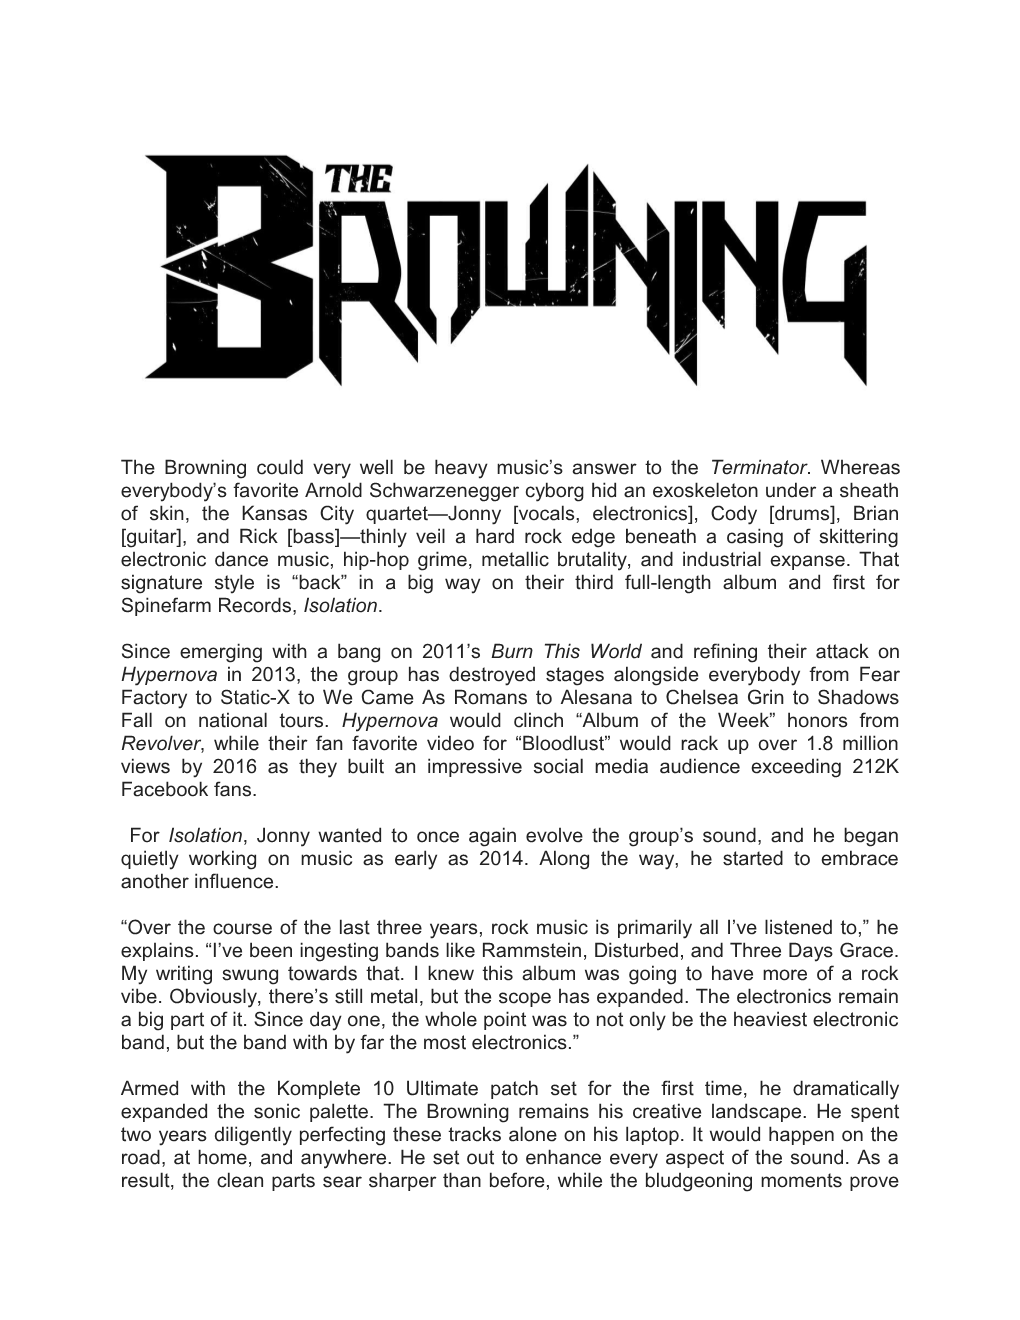 The Browning Could Very Well Be Heavy Music S Answer to the Terminator. Whereas Everybody